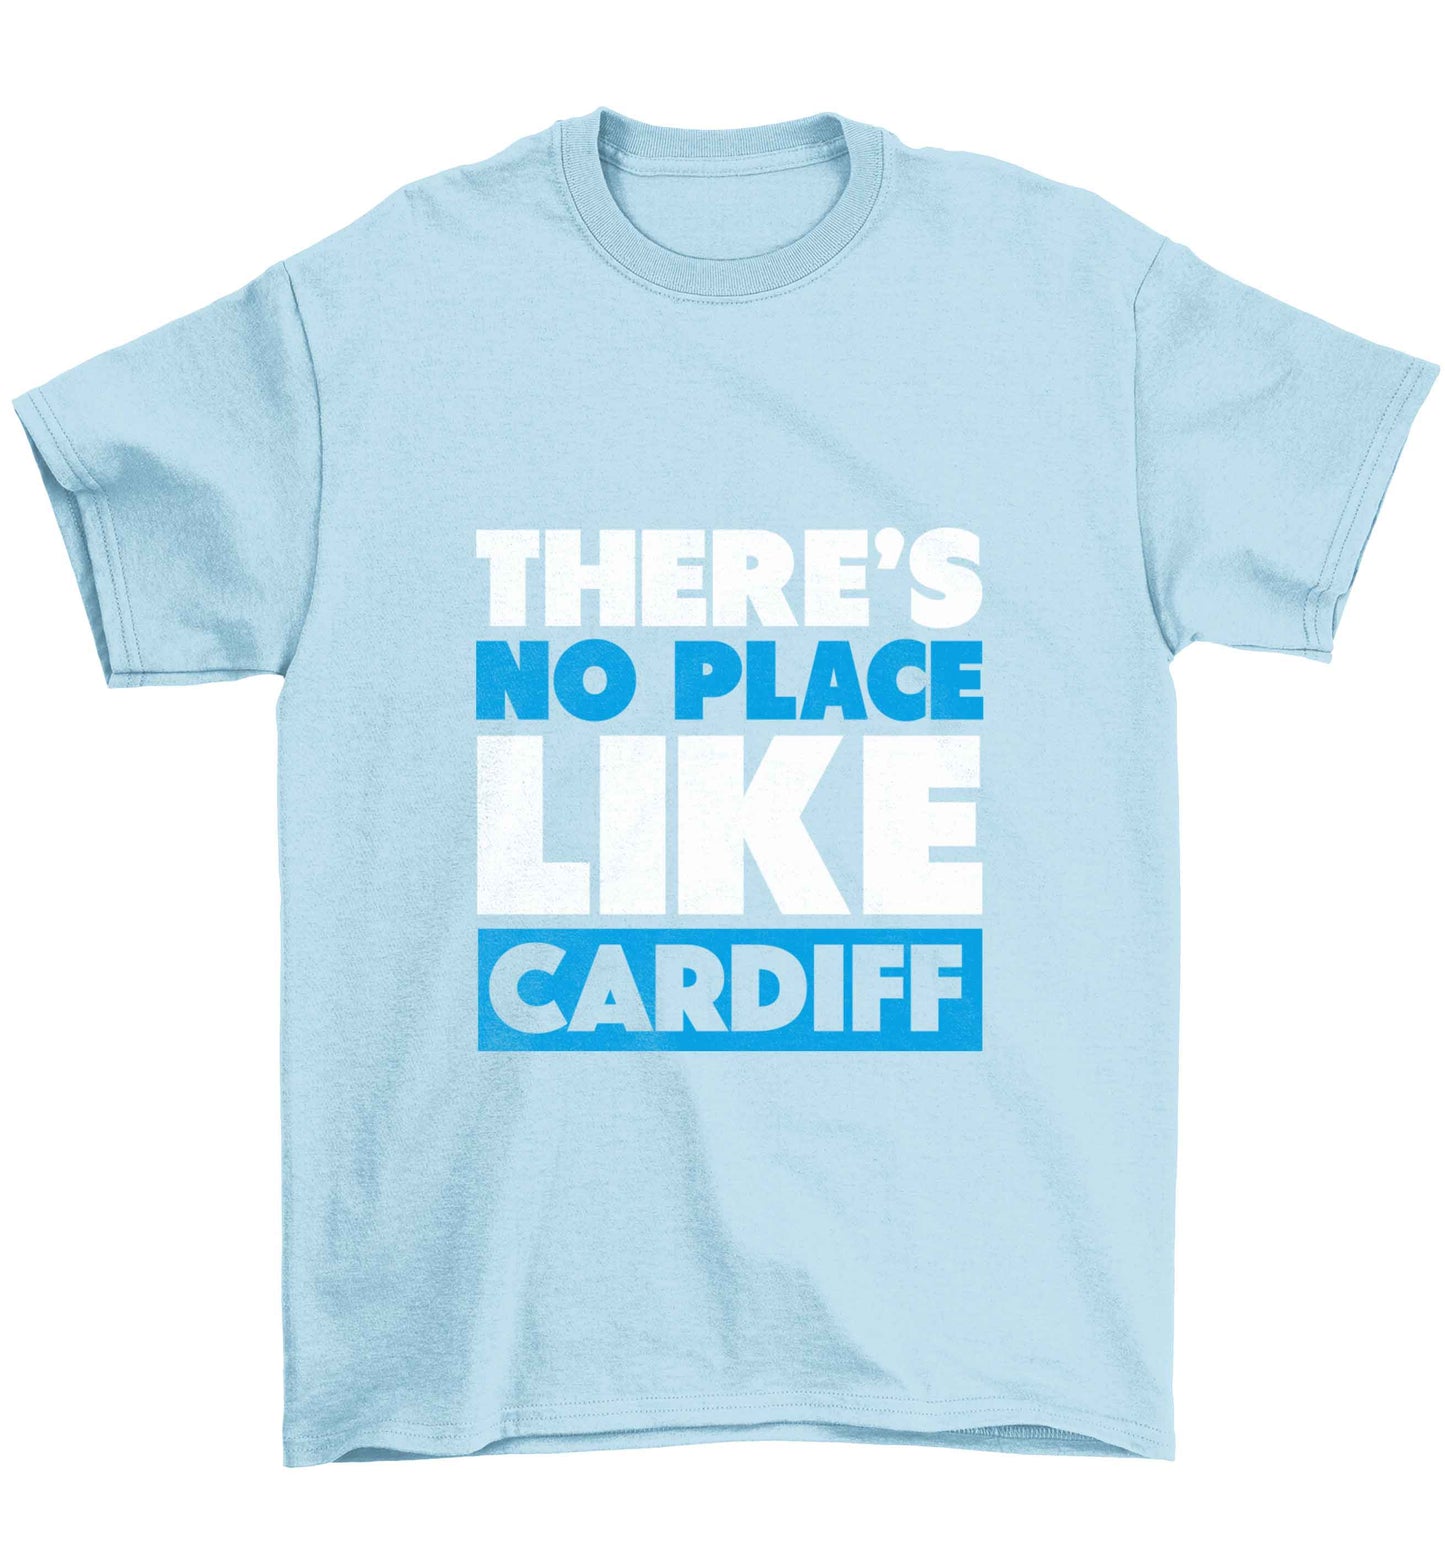 There's no place like Cardiff Children's light blue Tshirt 12-13 Years